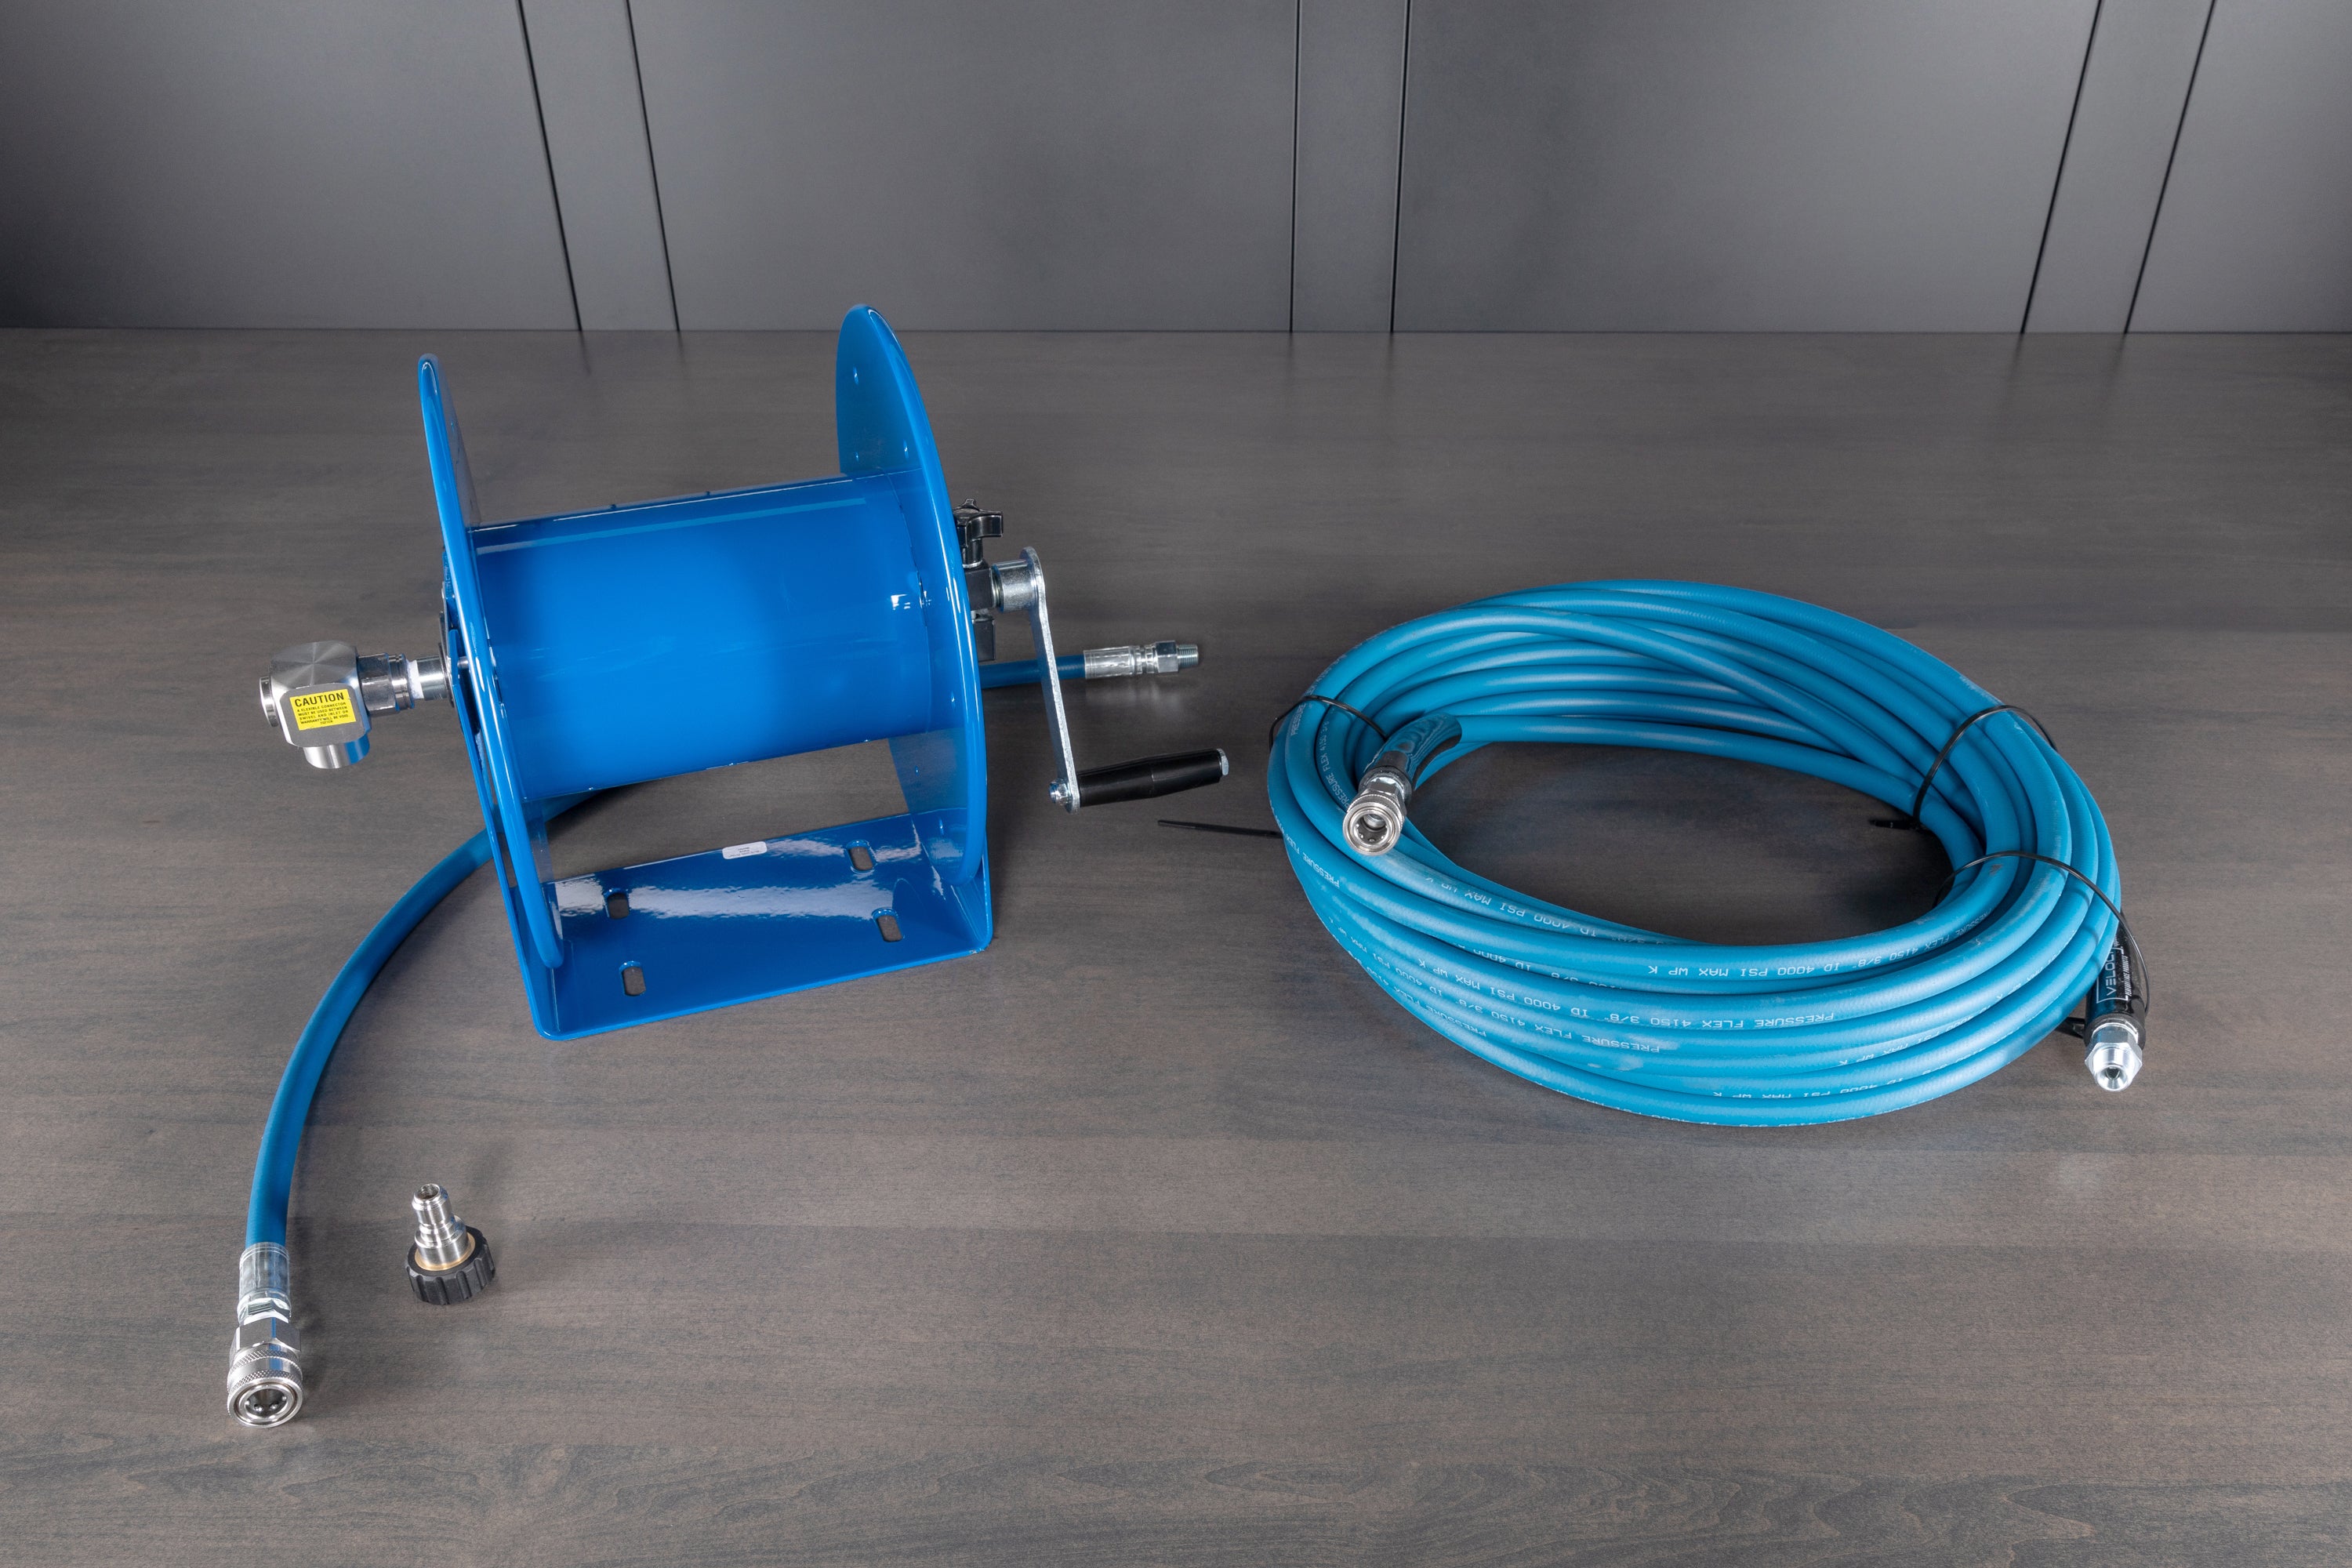 How to set up and install a hose reel